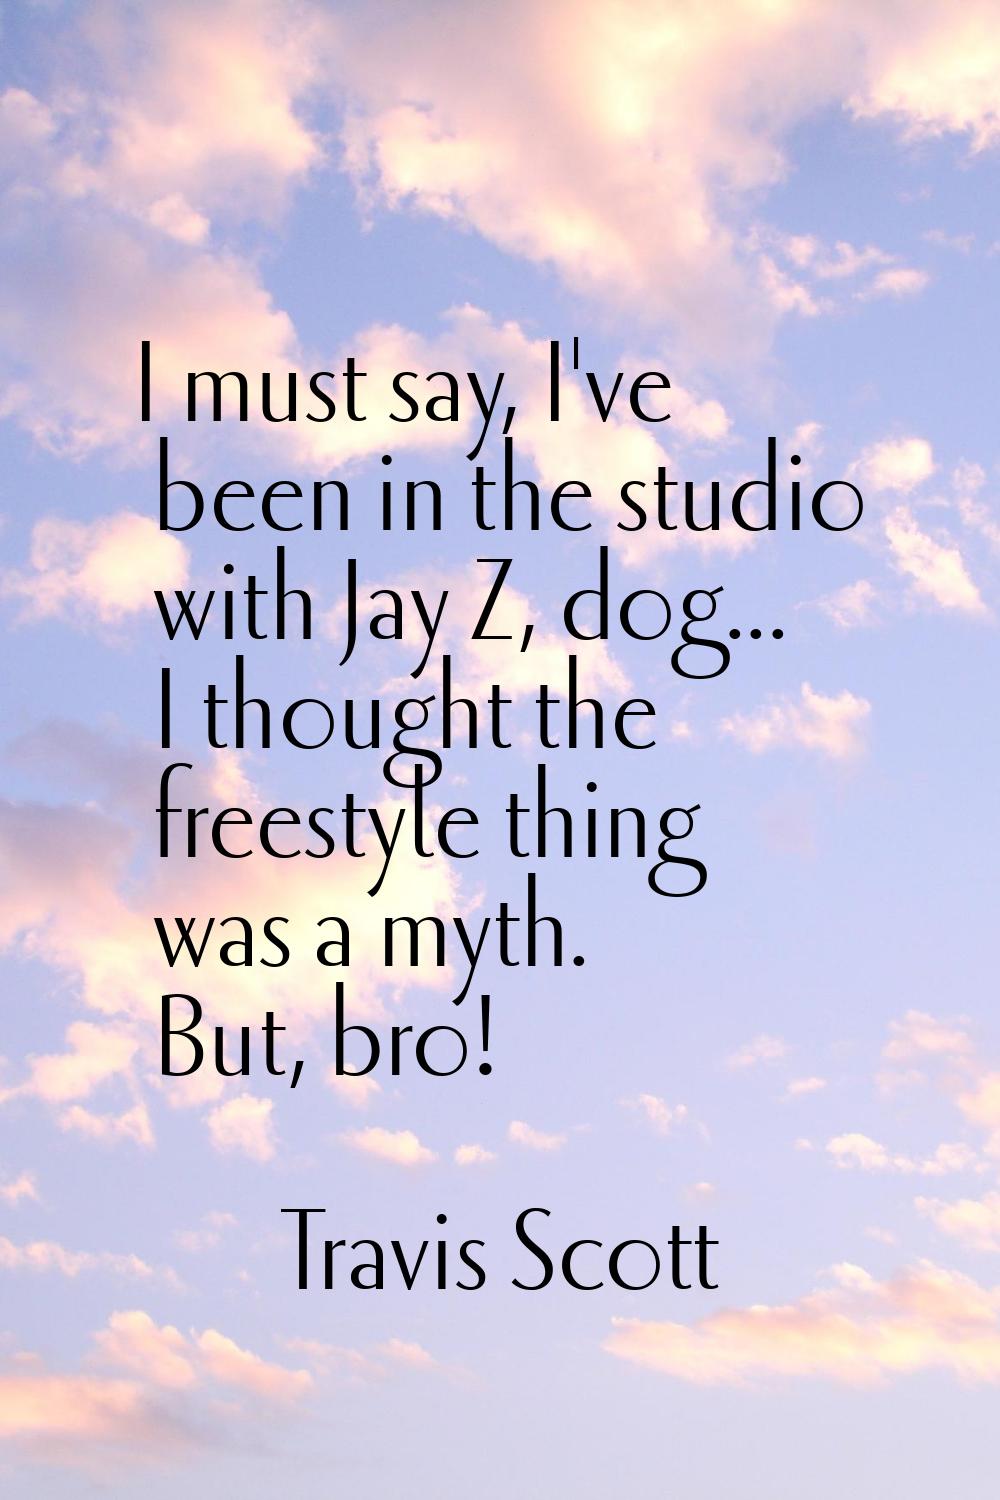 I must say, I've been in the studio with Jay Z, dog... I thought the freestyle thing was a myth. Bu